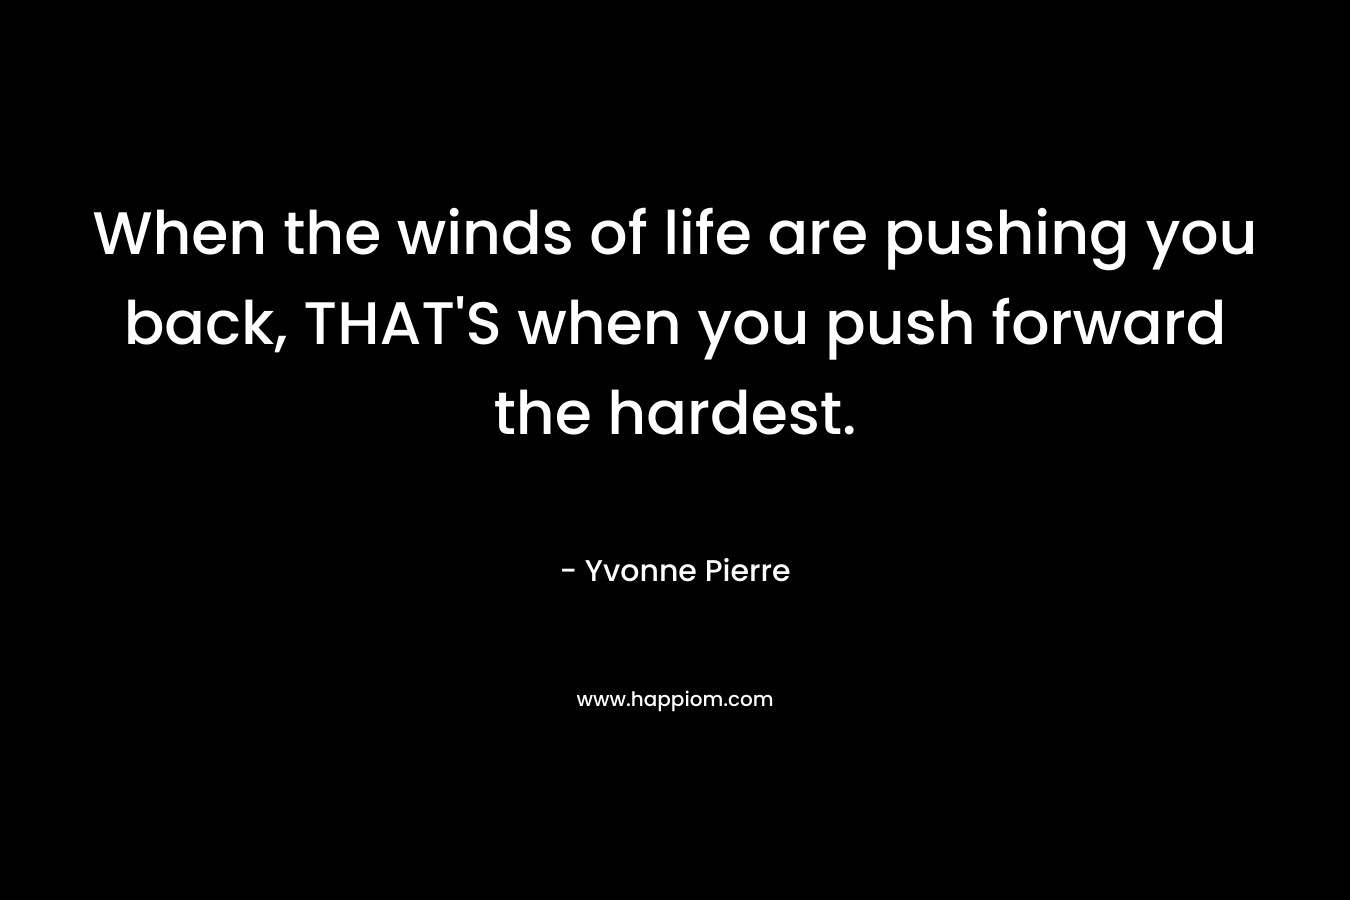 When the winds of life are pushing you back, THAT'S when you push forward the hardest.